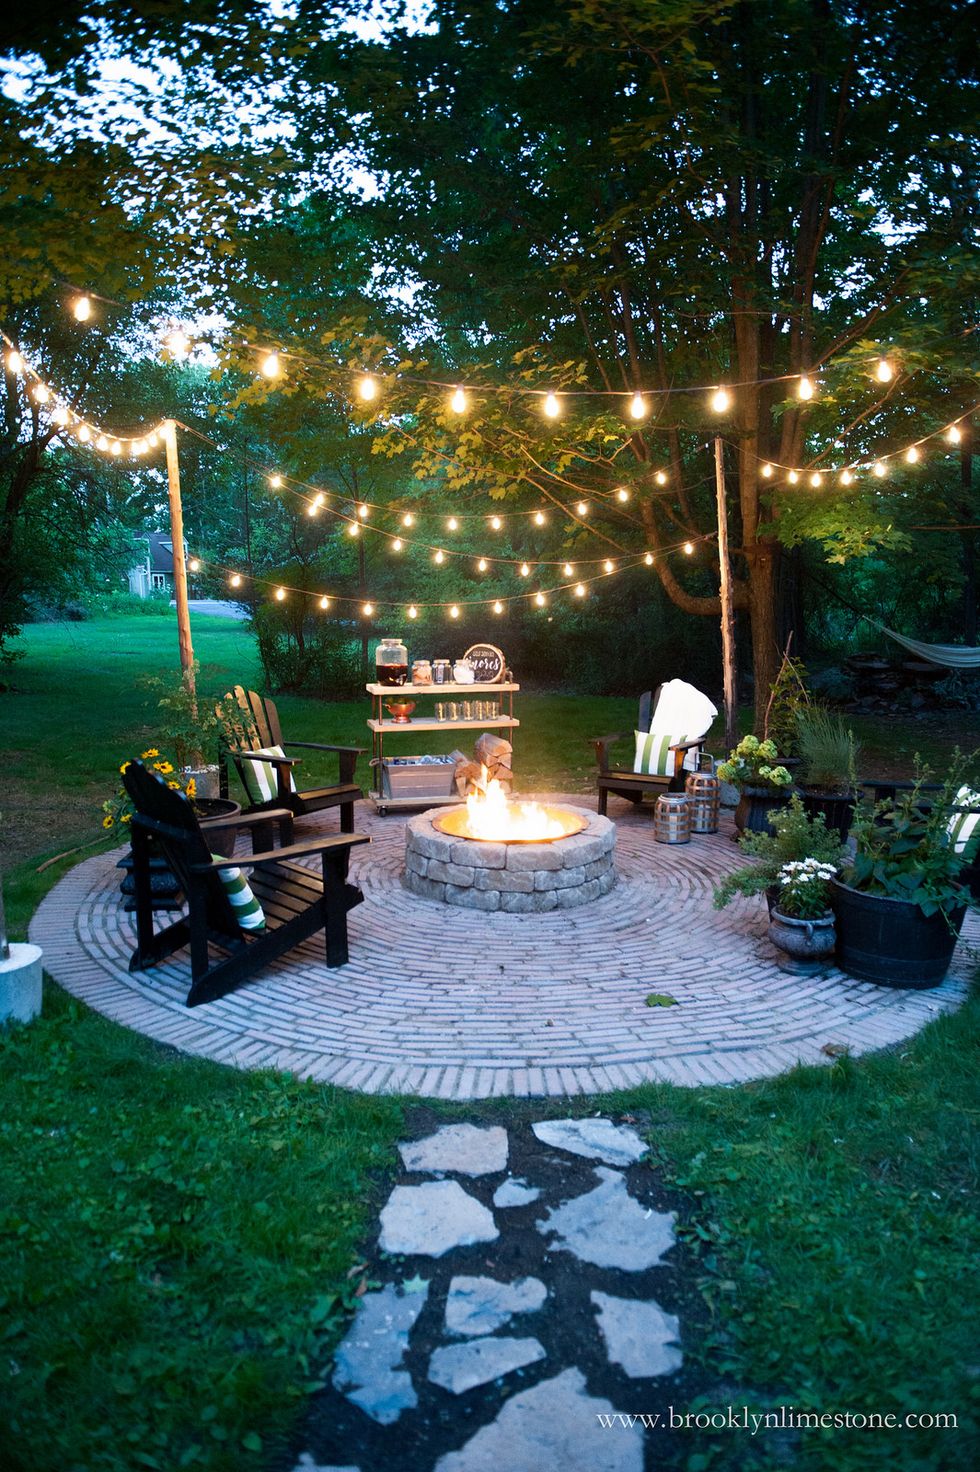 The Best Outdoor String Lights, According to Interior Designers